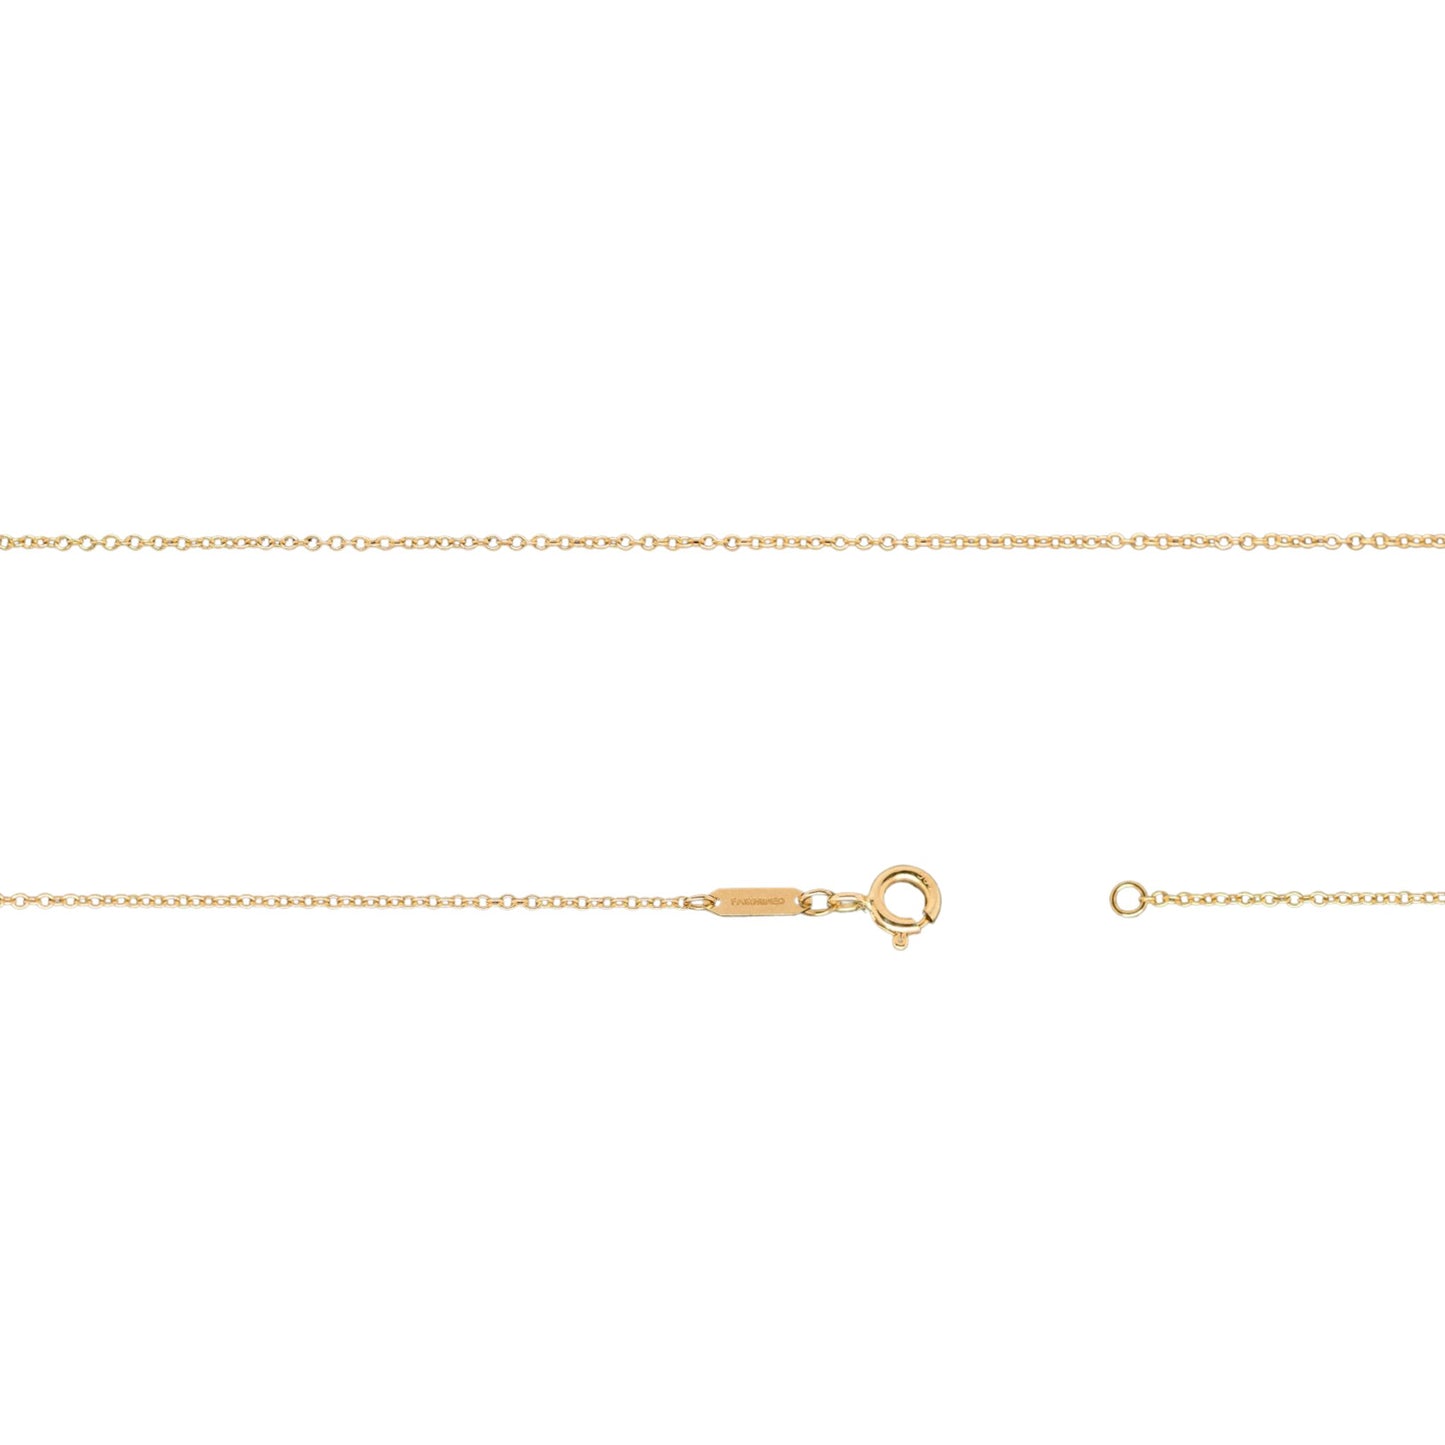 1.2mm x 1.4mm Cable Chain in Fairmined Yellow Gold - W.R. Metalarts